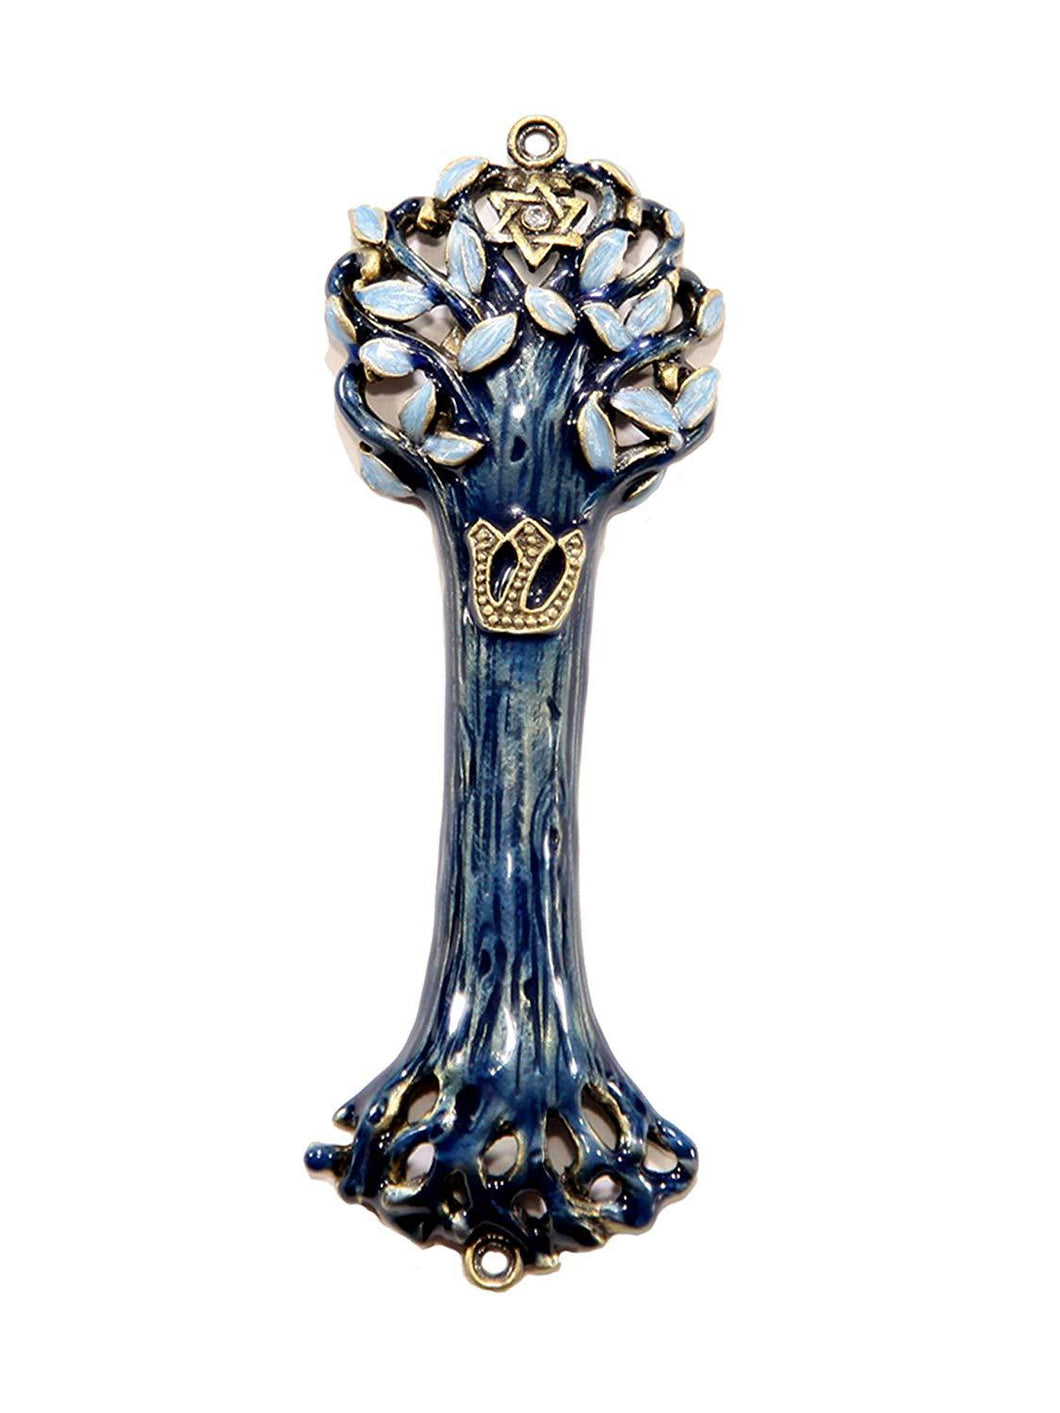 Bless This House with Tree of Life Mezuzah Case, Wooden Texture Design and Crafted in Brass 4